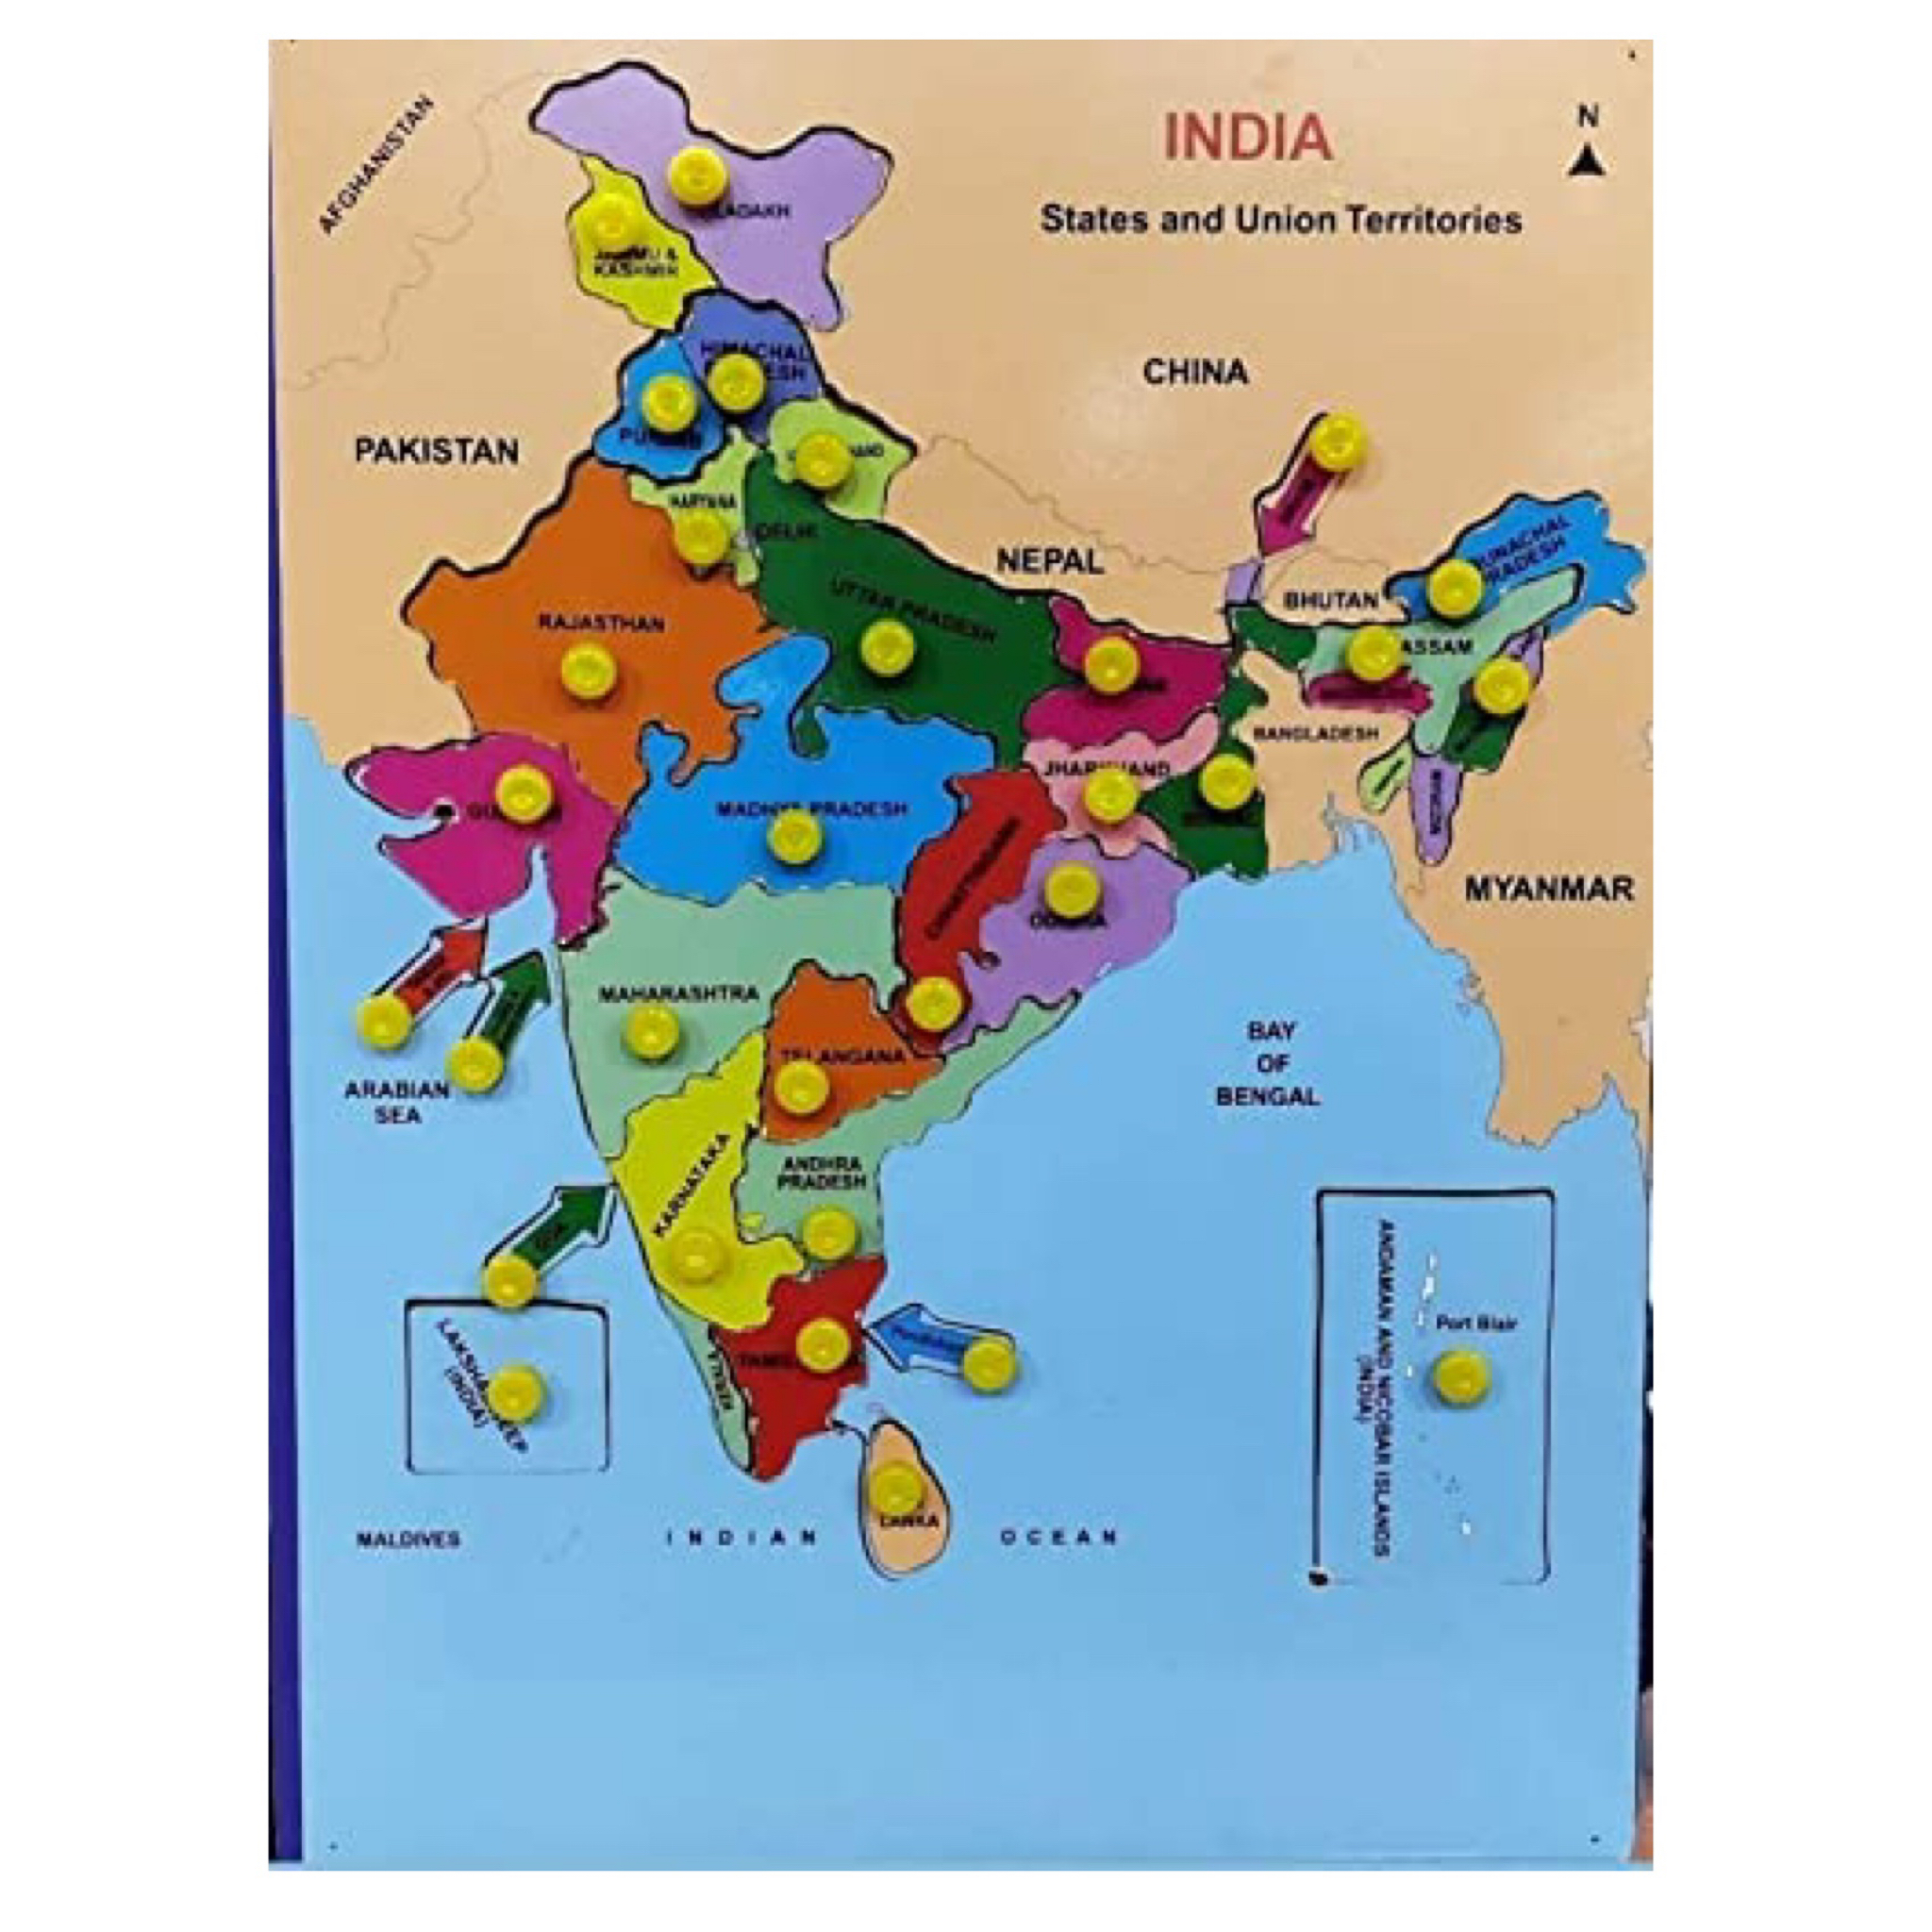 Buy Muthu Groups India map (states and union teeeitories) online usa [ USA ] 